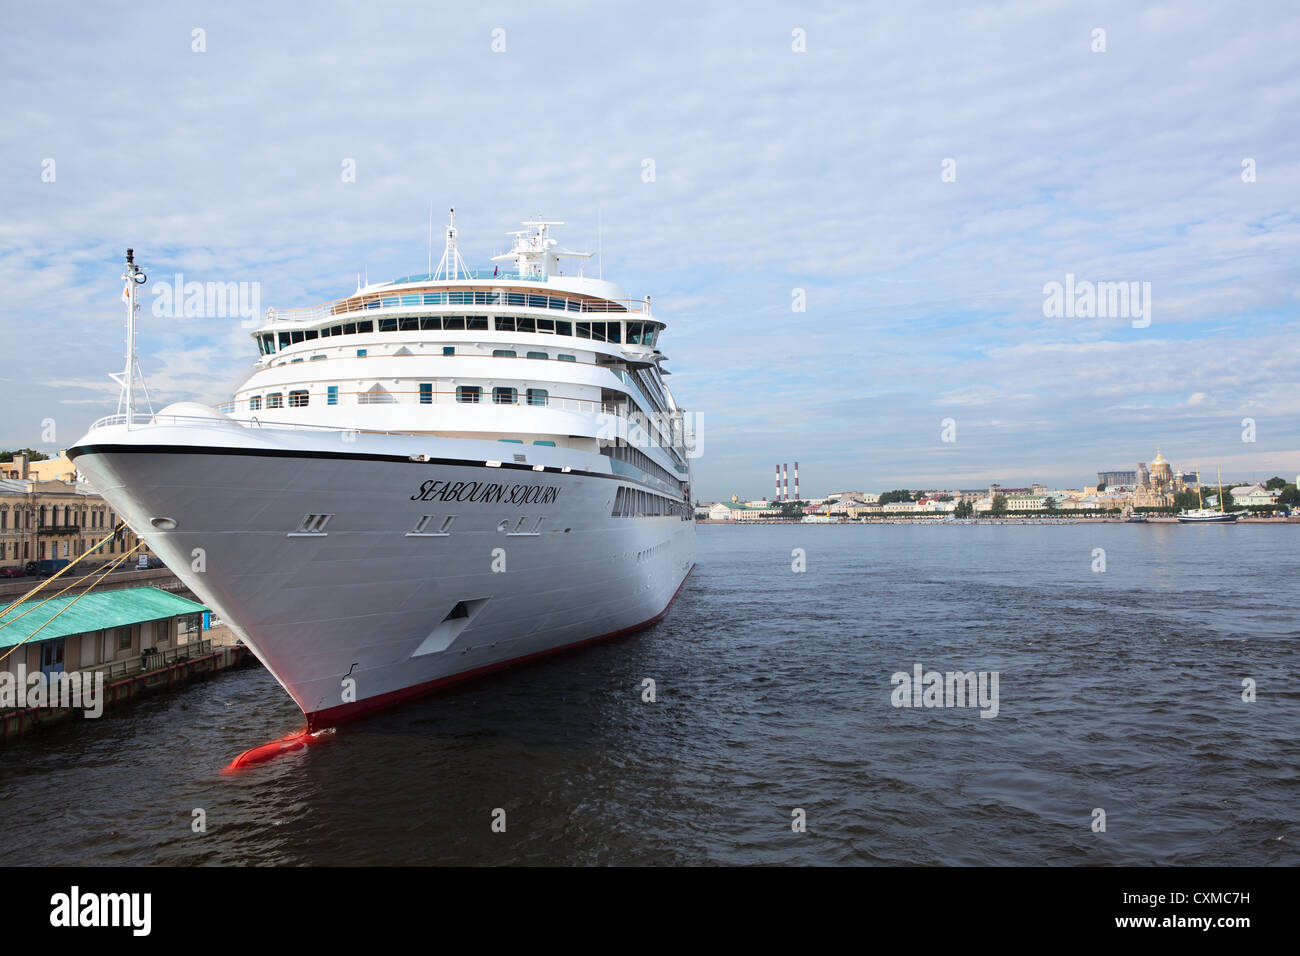 The Seabourn Sojourn ship on Saint-Petersburg English embankment floating on circa August, 2012 in Saint Petersburg, Russia Stock Photo